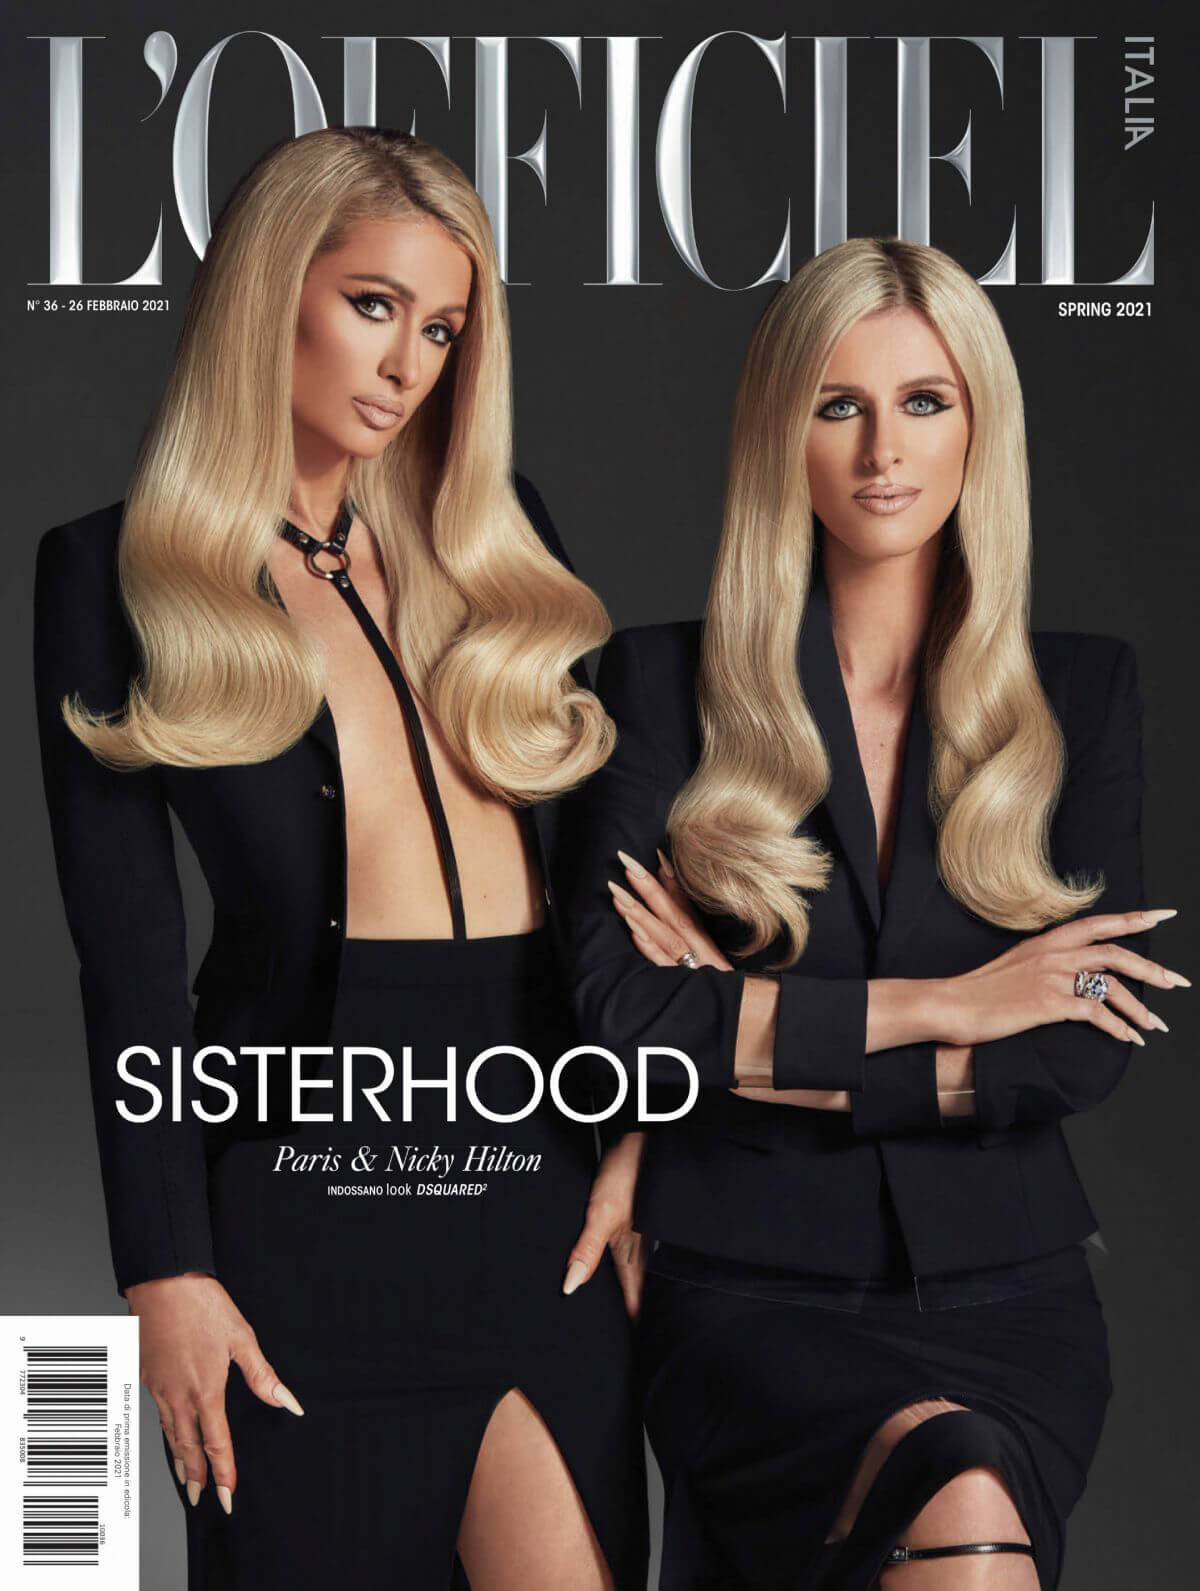 Paris and Nicky Hilton On The Cover Page Of L'Officiel Magazine, Italy Spring 2021